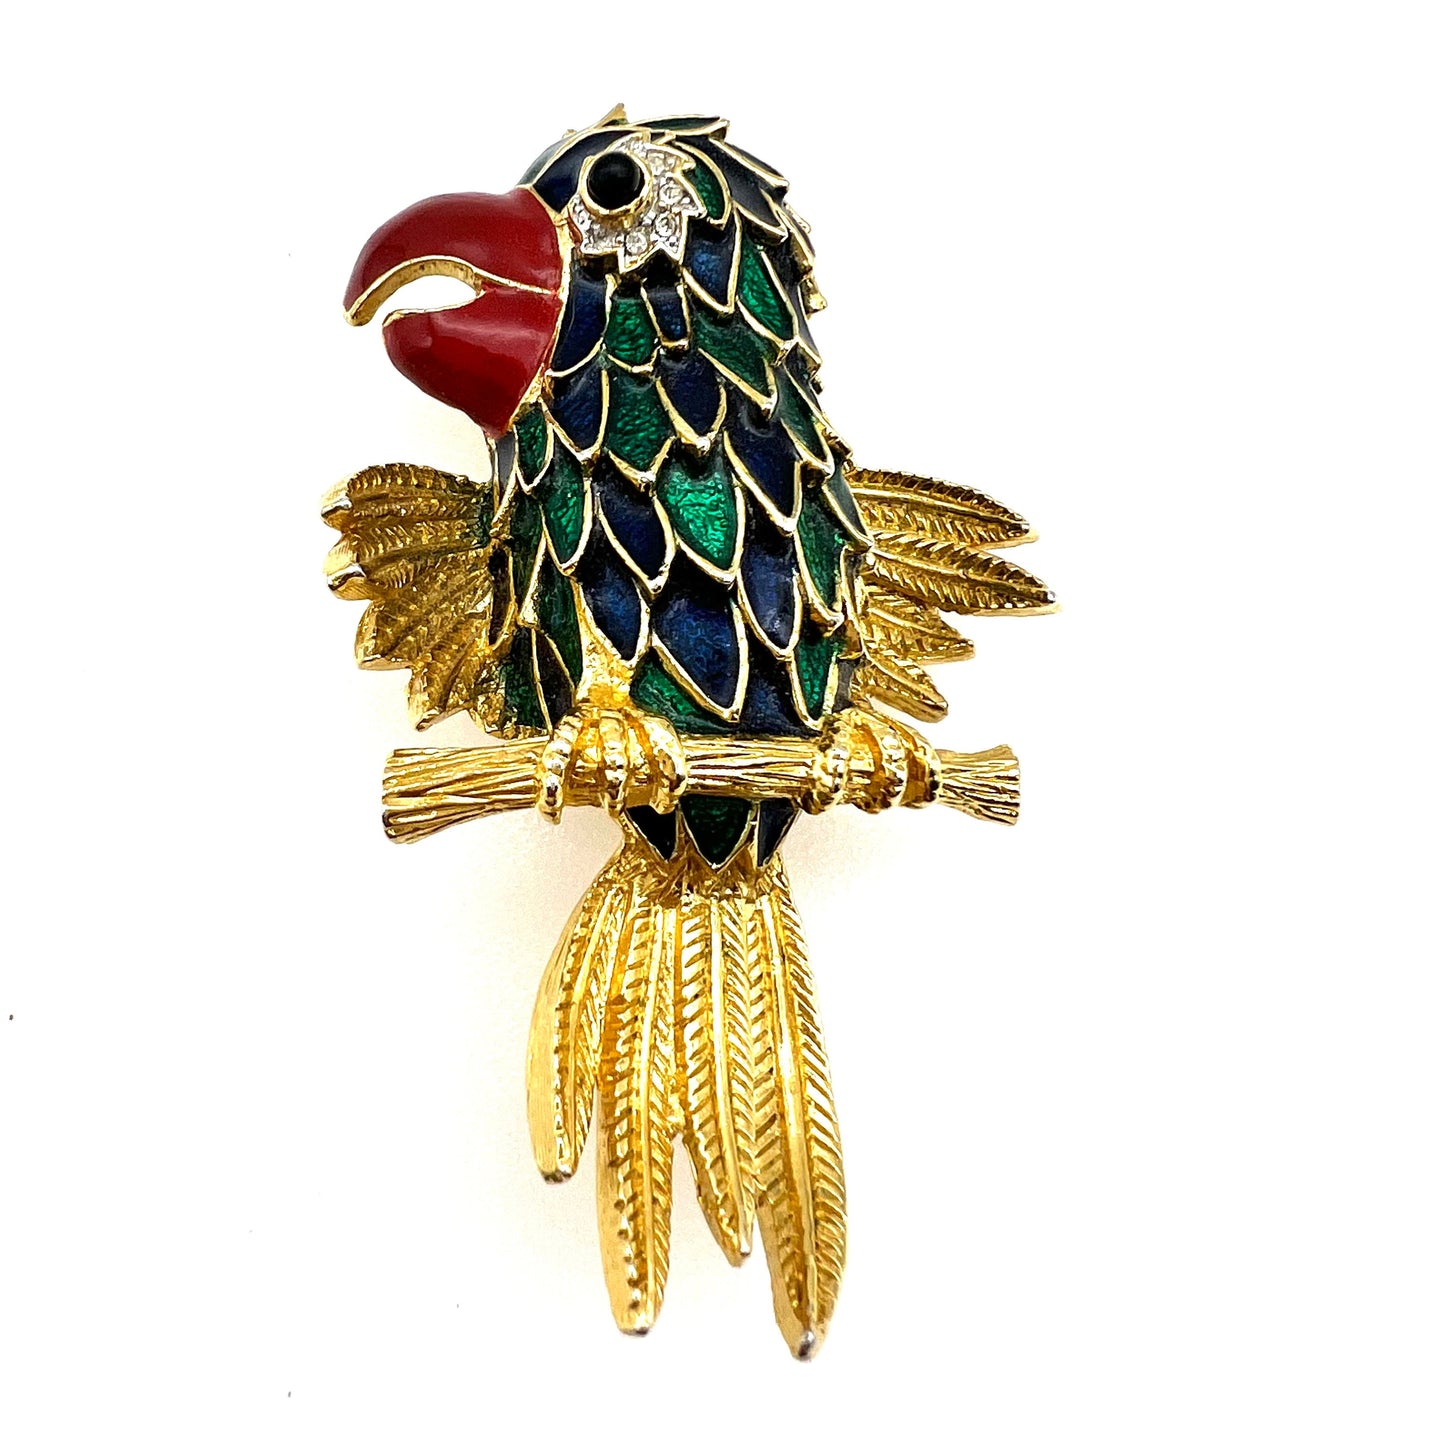 D'Orlan 22ct Gold Plated and Enamel Squawking Parrot Brooch